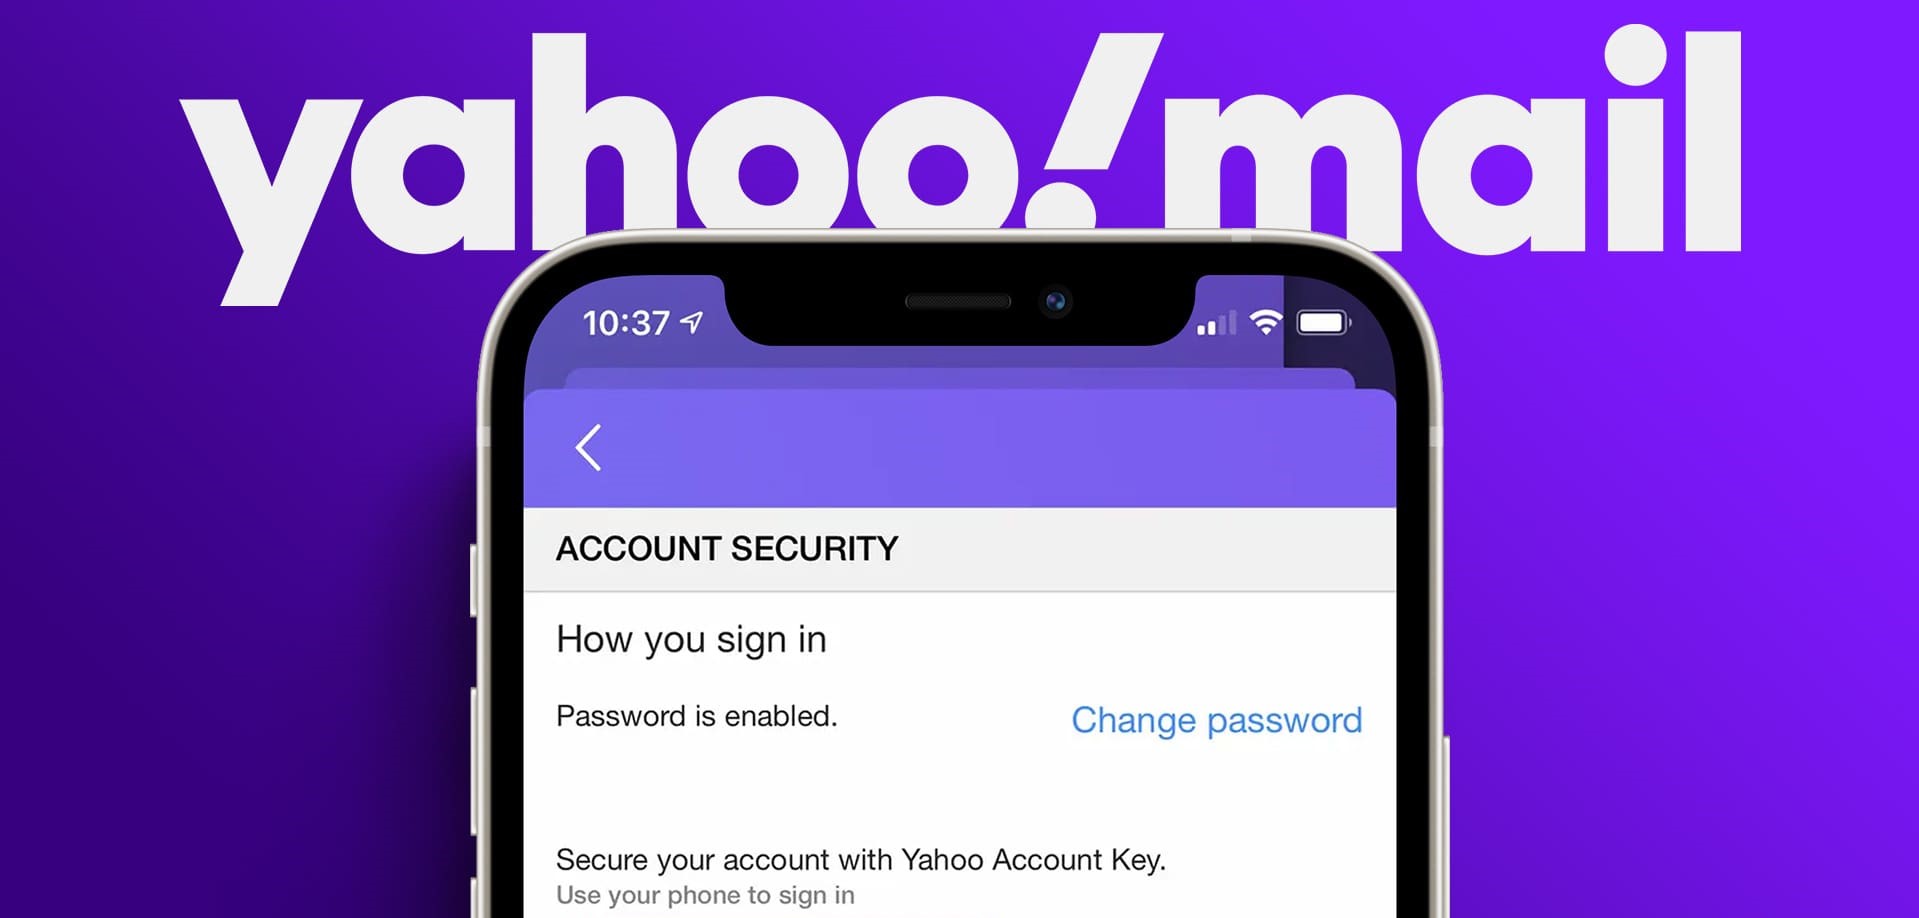 yahoo-mail-how-tos-help-tips